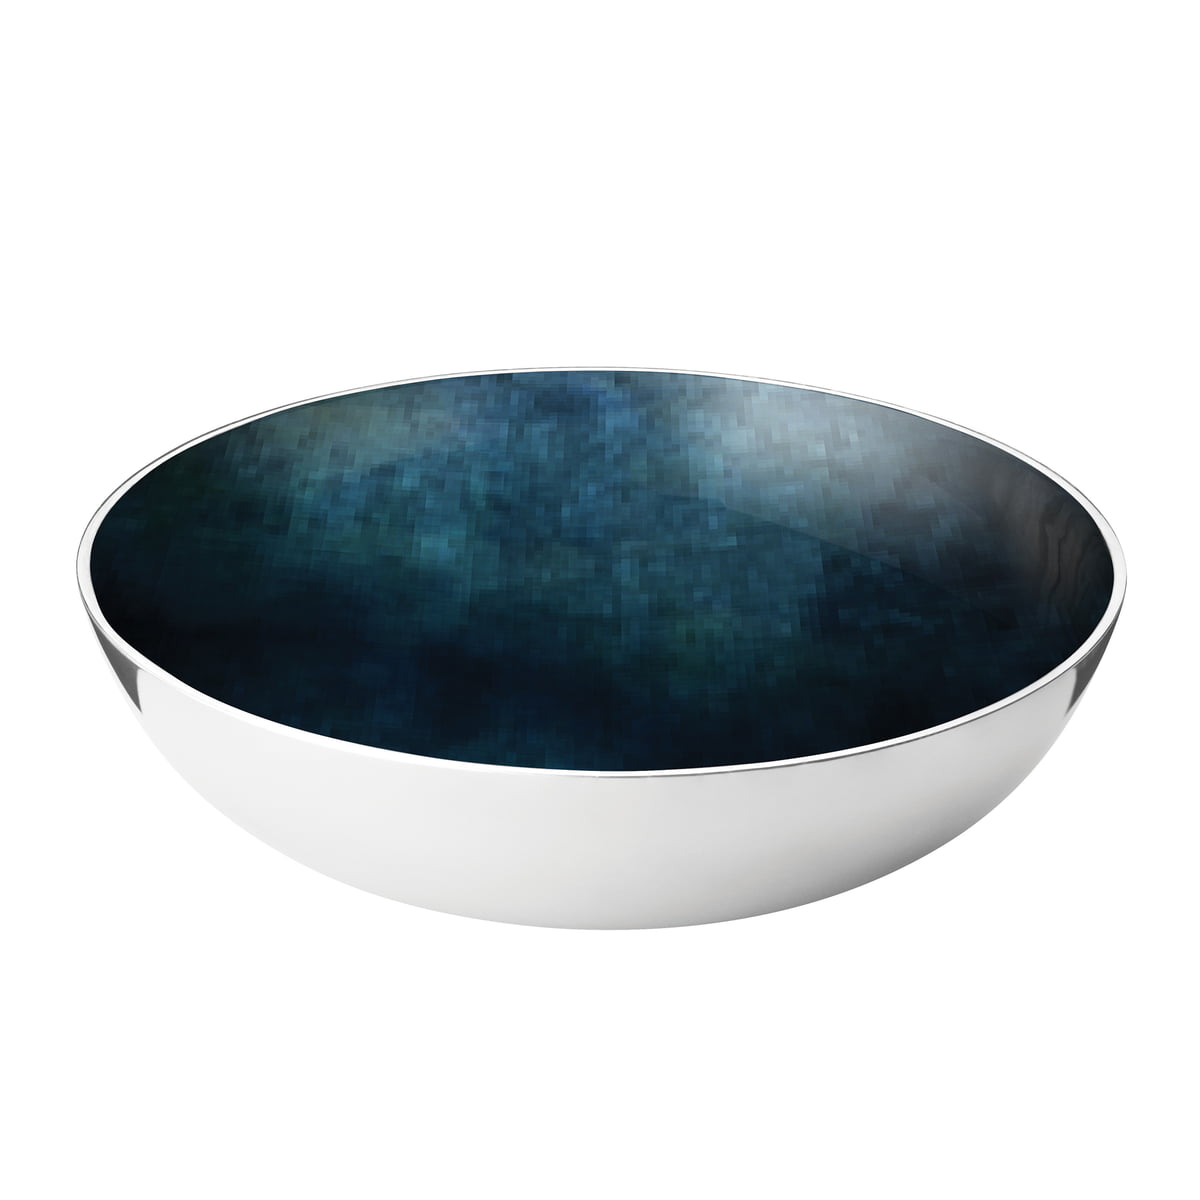 Stockholm by Stelton our Bowl in shop Horizon